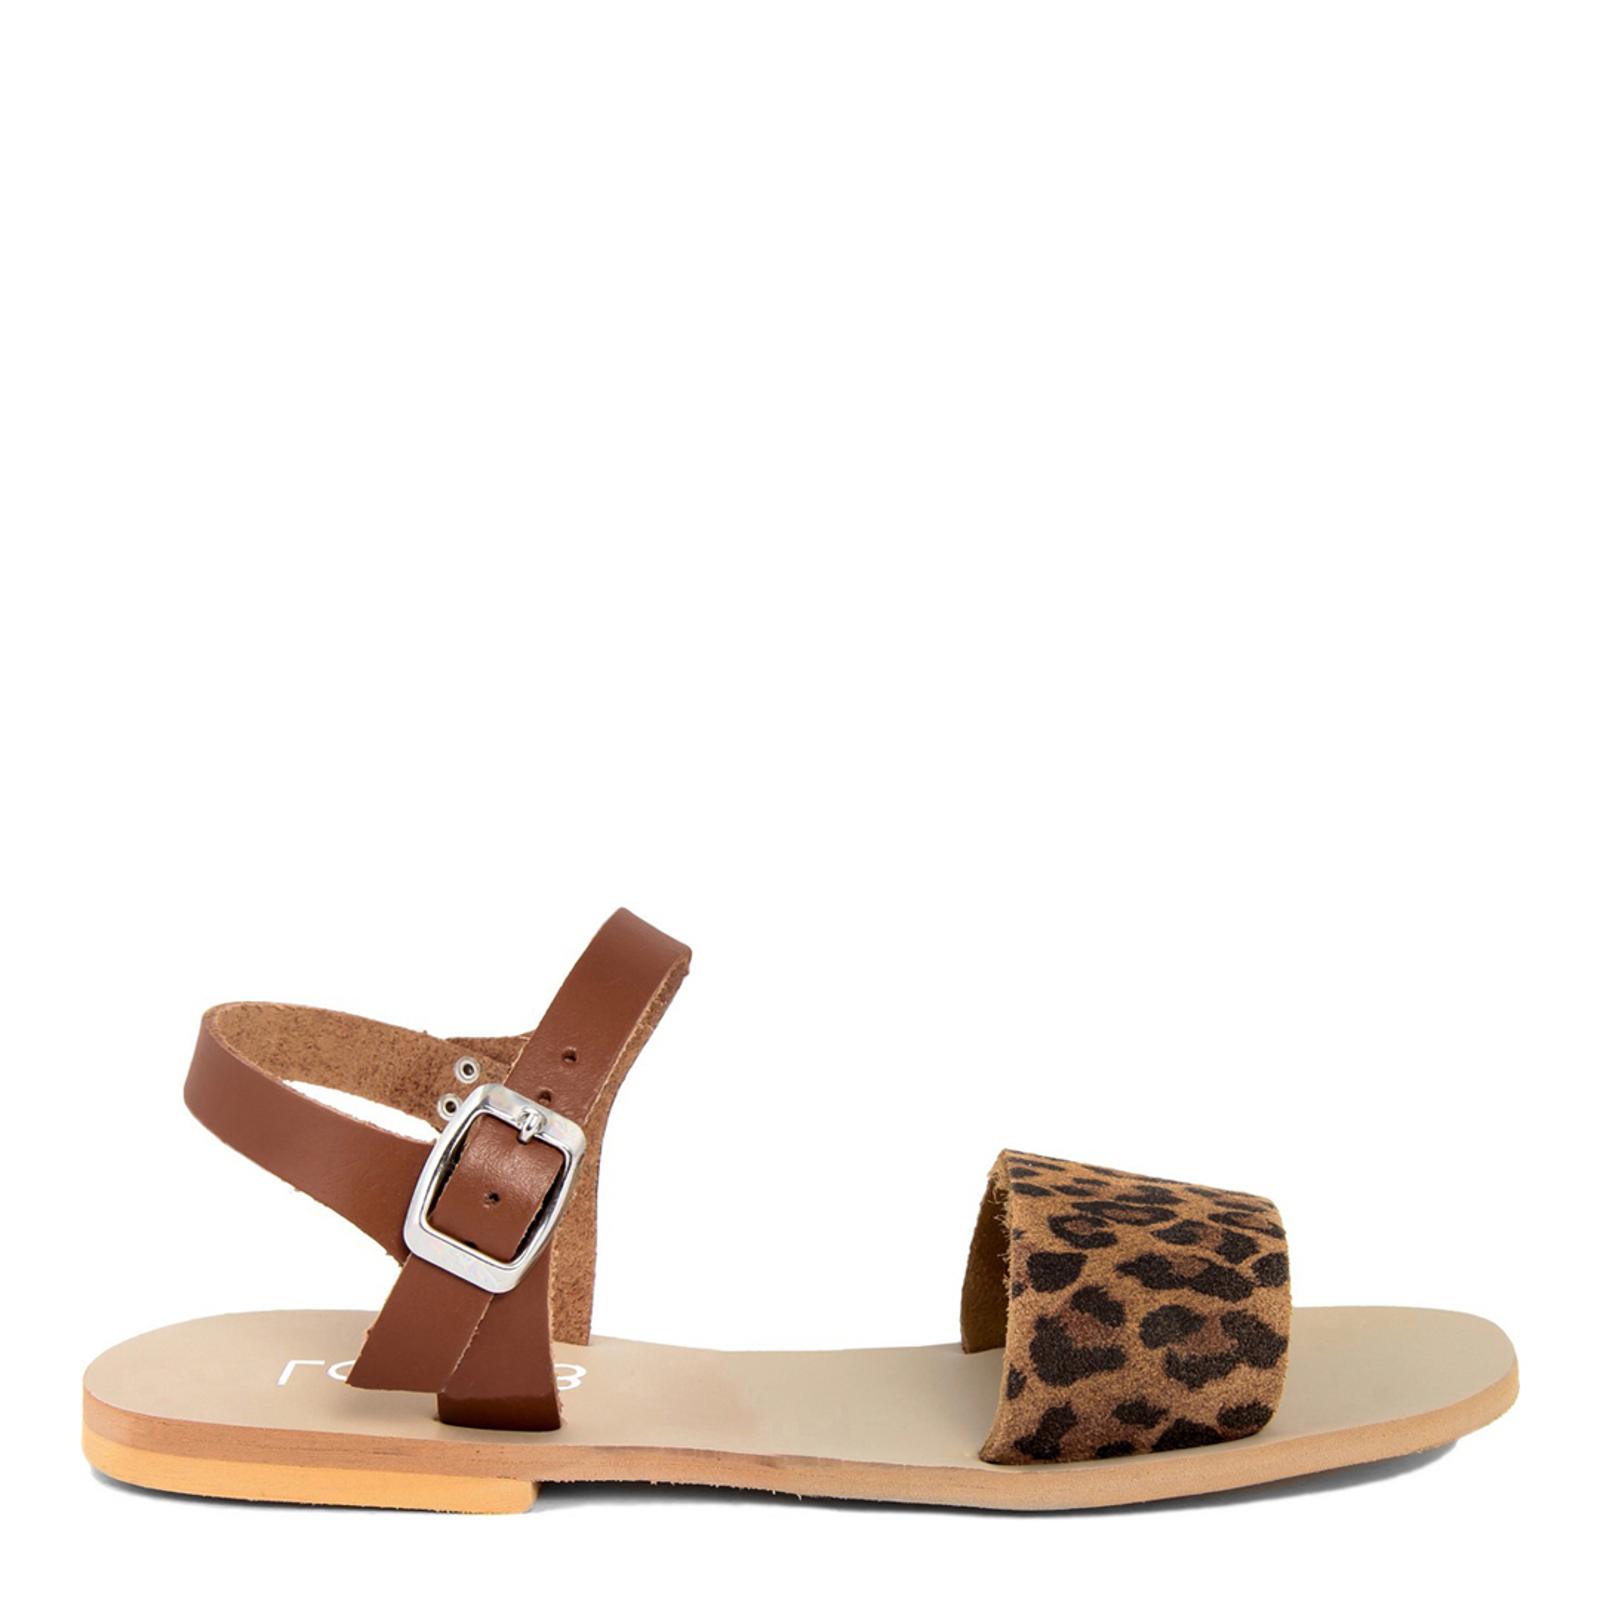 Chocolate Brown & Leopard Print Leather Sandals - BrandAlley